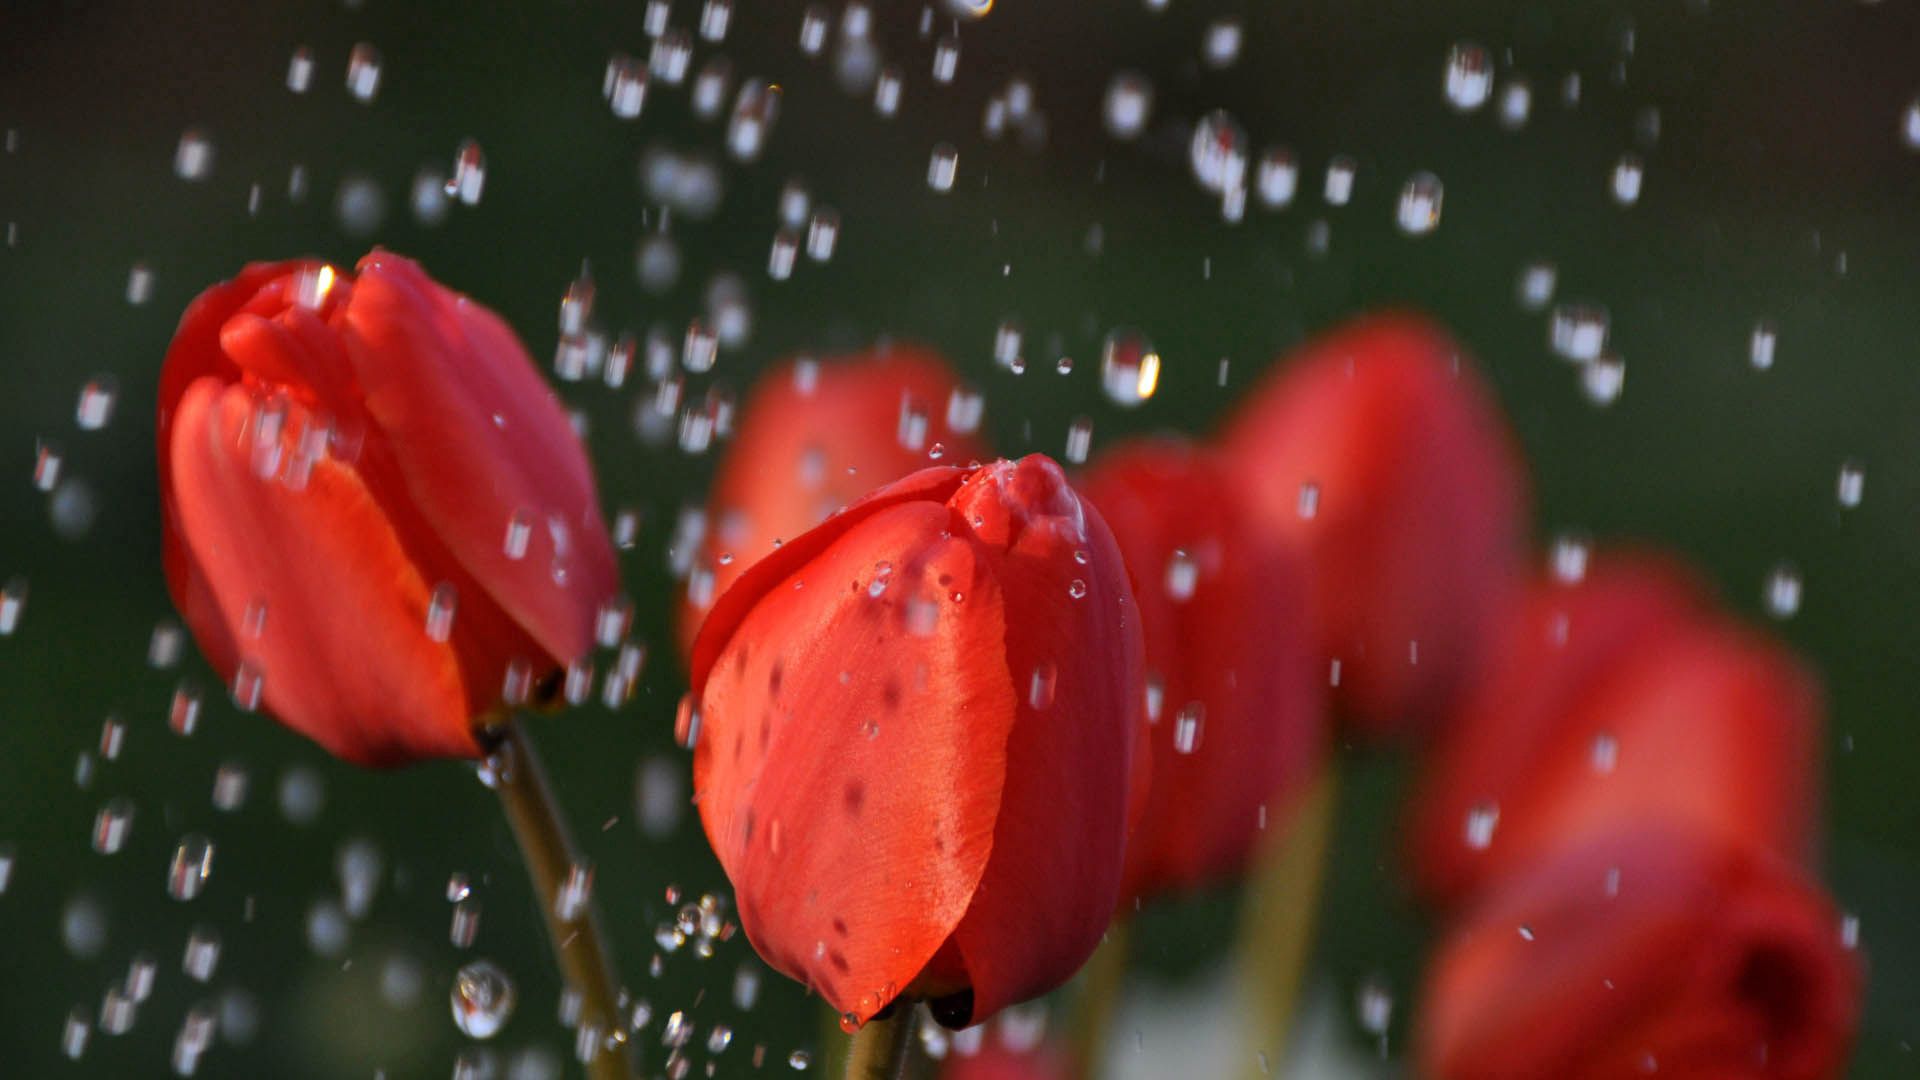 133704 download wallpaper tulips, red, flower, macro screensavers and pictures for free